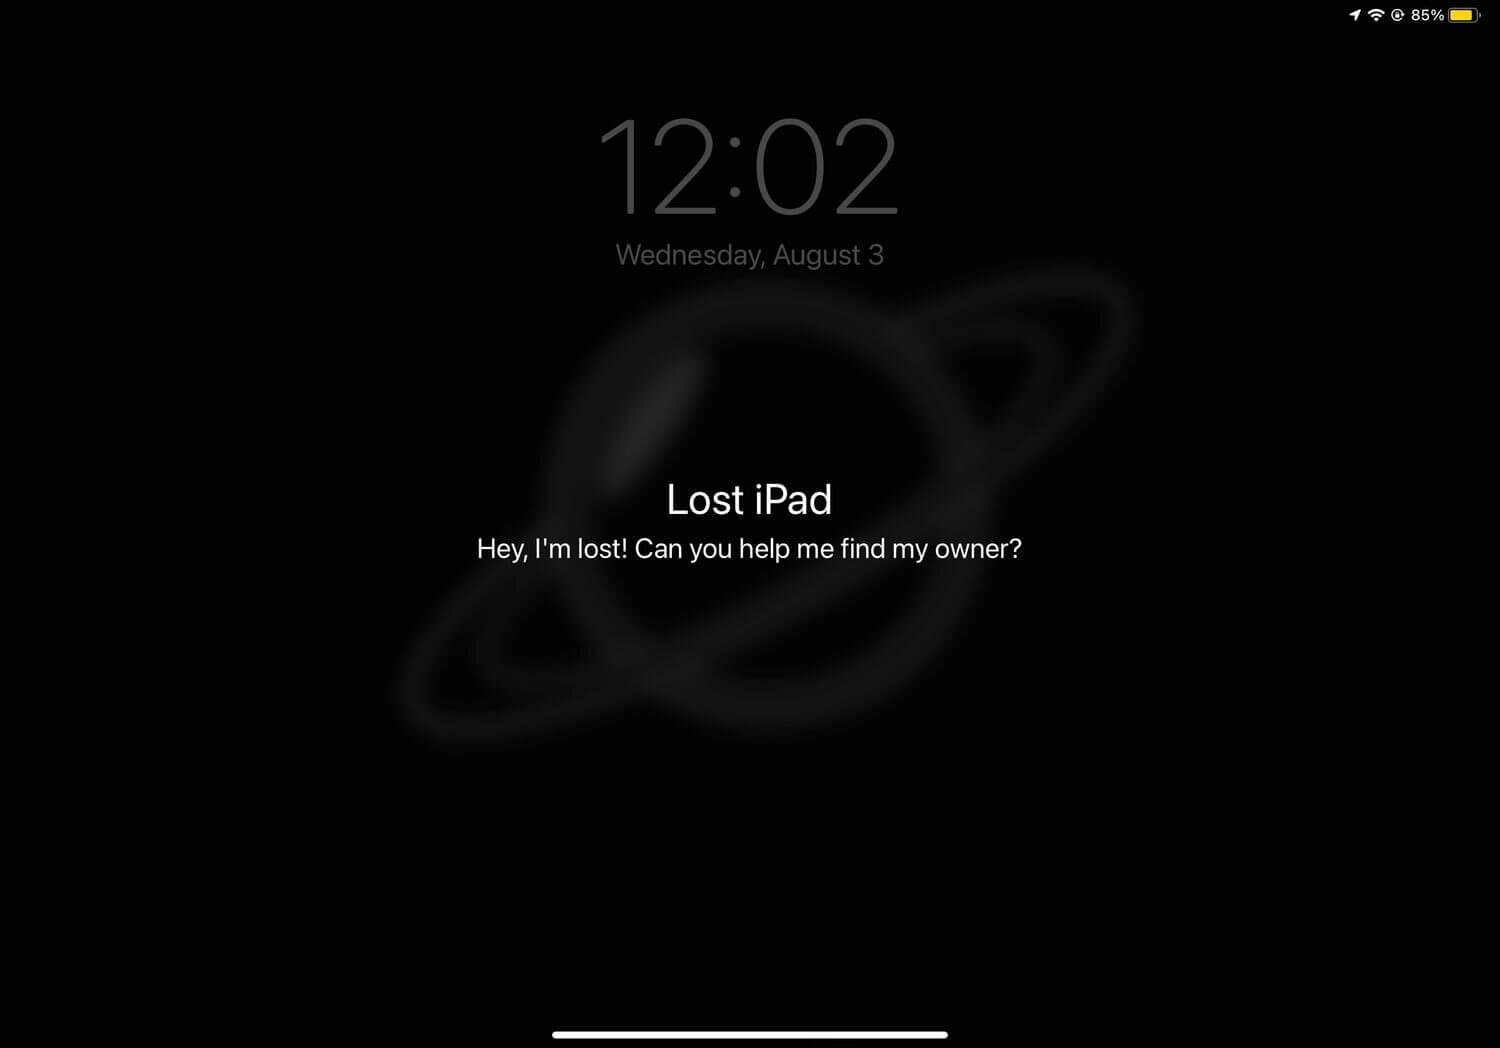 ipad is locked in lost mode